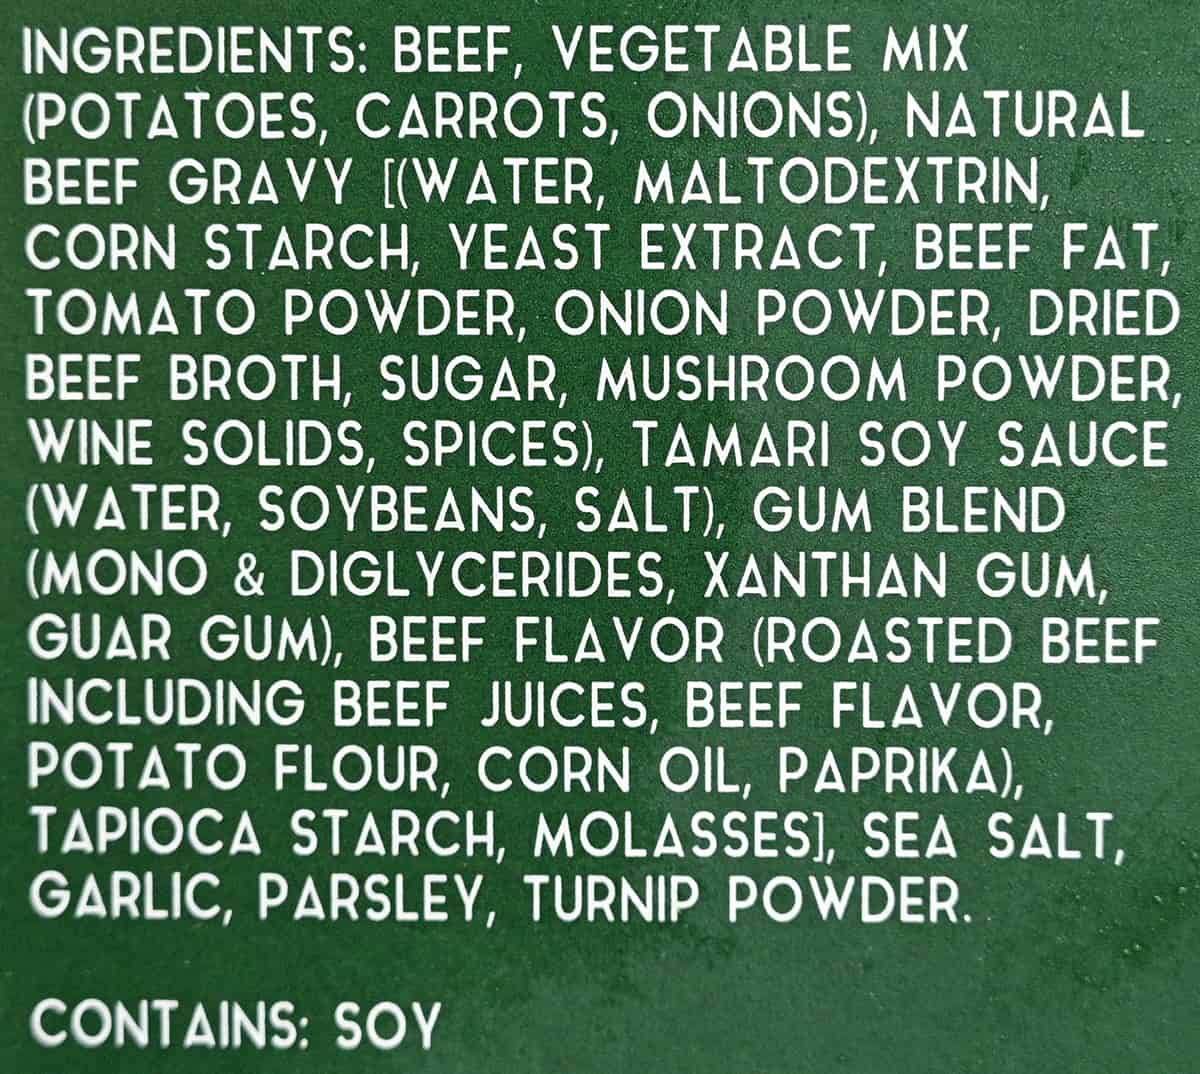 Image of the ingredients for the stew from the back of the box.